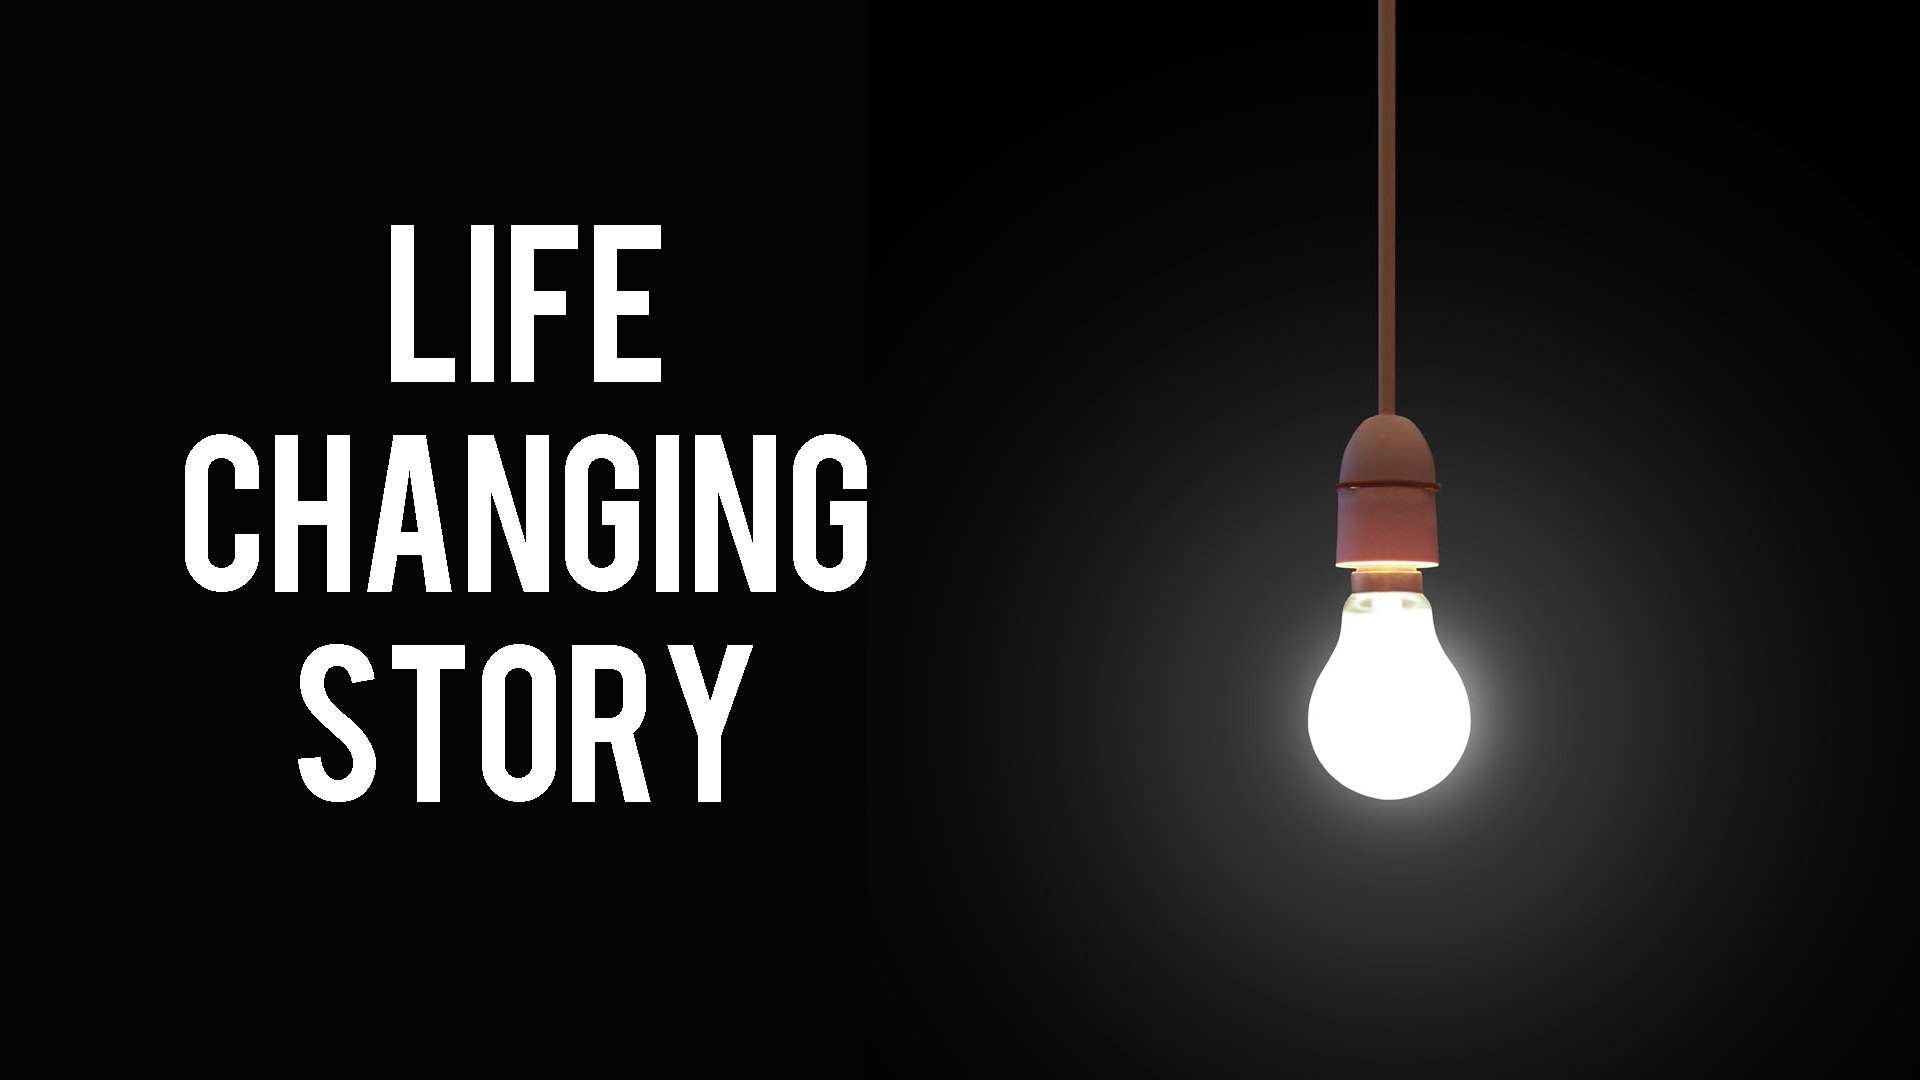 Ways to change life. Life changing. Life changes. Life changes фон. Life story.